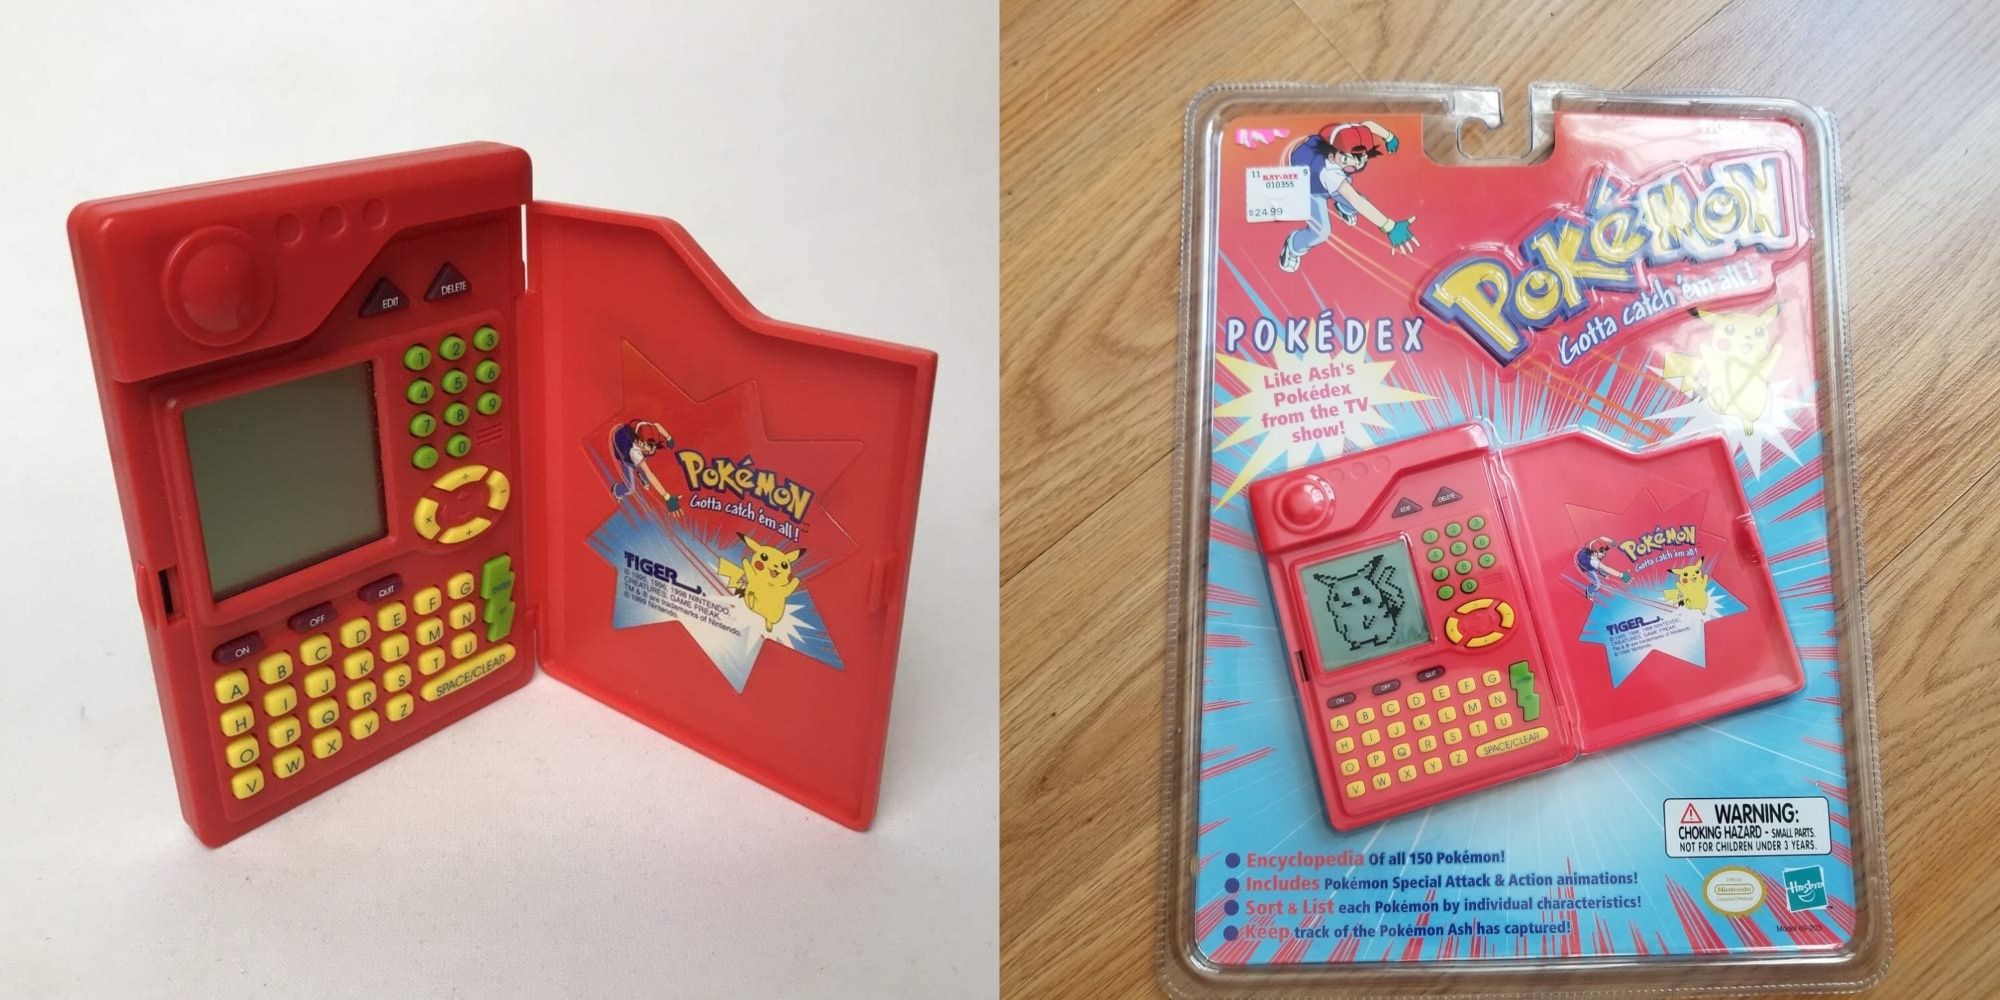 Nintendo Apparently Hated The Pokedex Toy, Thought It Would Steal Game Sales